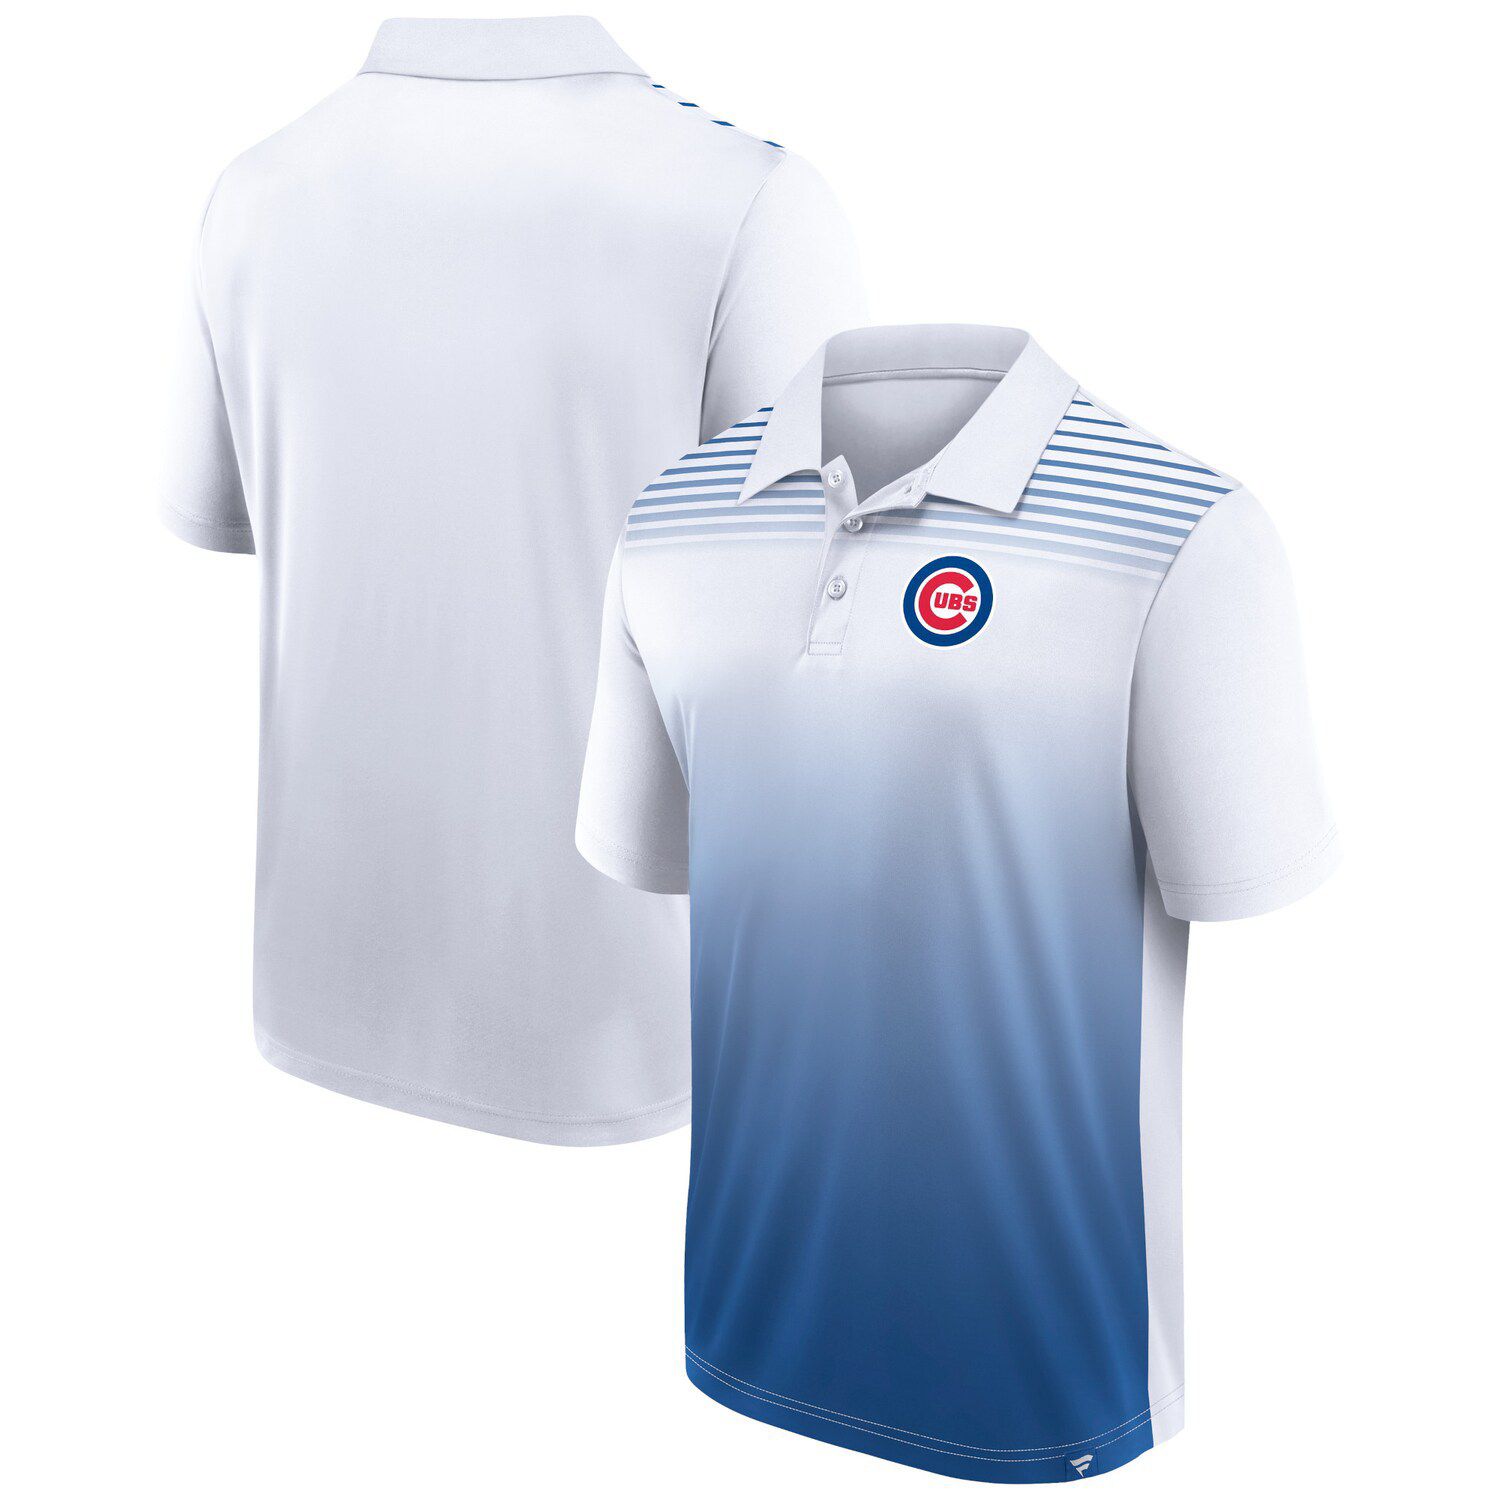 Nike Men's Chicago Cubs Home Plate Striped Polo Shirt